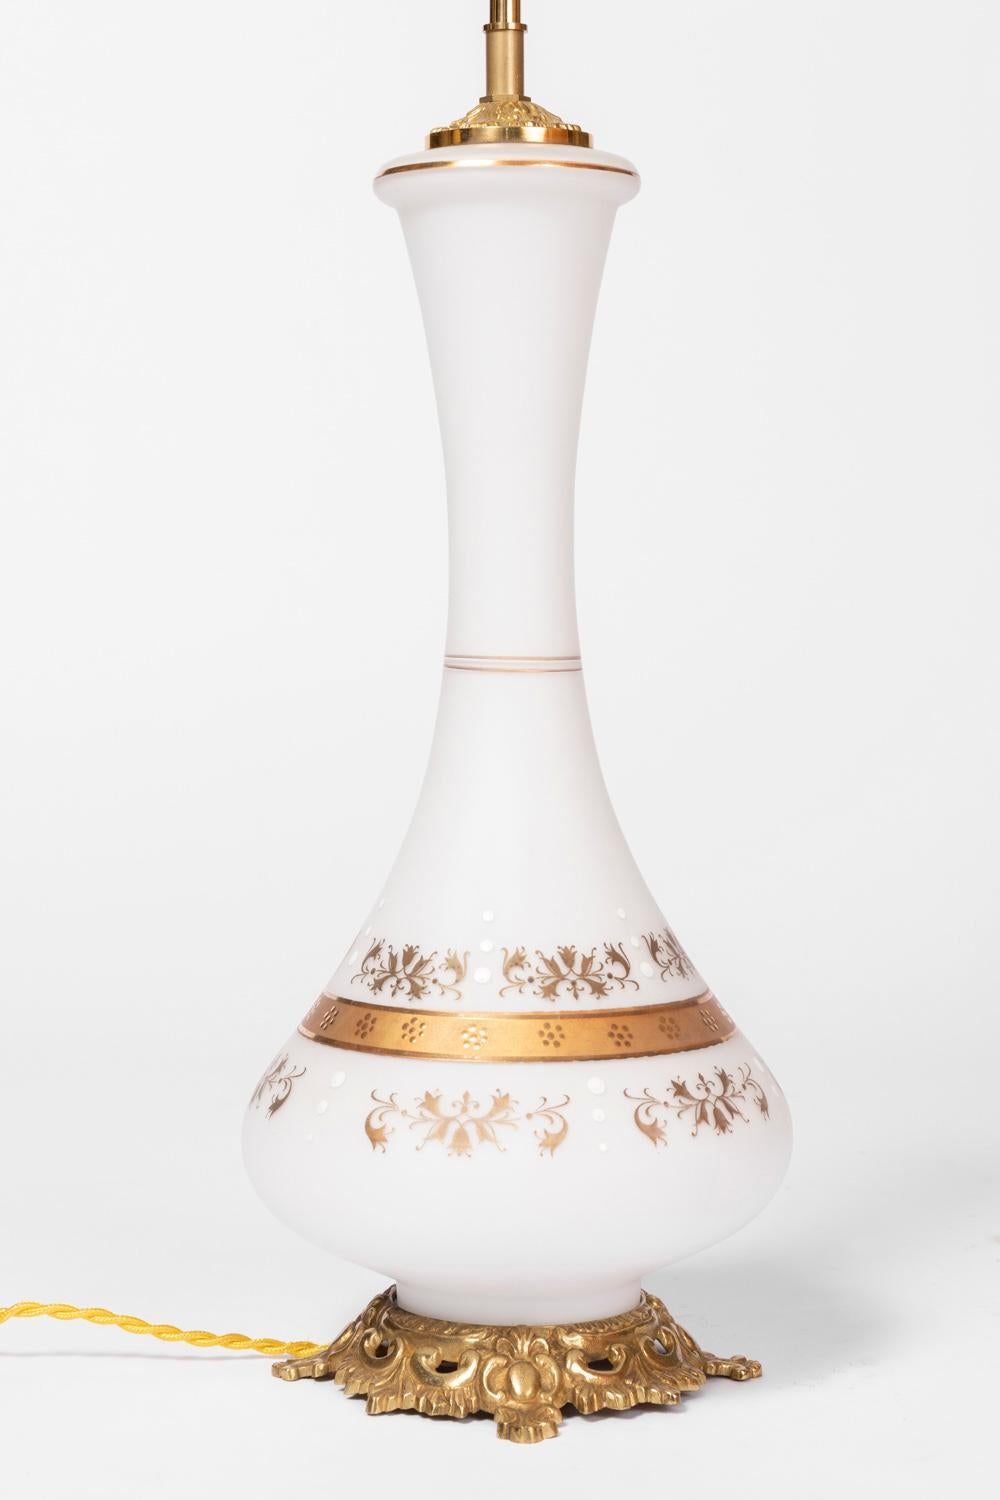 Pair of baluster shape lamps in white opaline. Decor of gilt edgings with dots motifs and adorned on the top and the bottom by gilt foliage scrolls and white dots. Two gilt edgings adorned the thinnest part of the necj and another on the high part